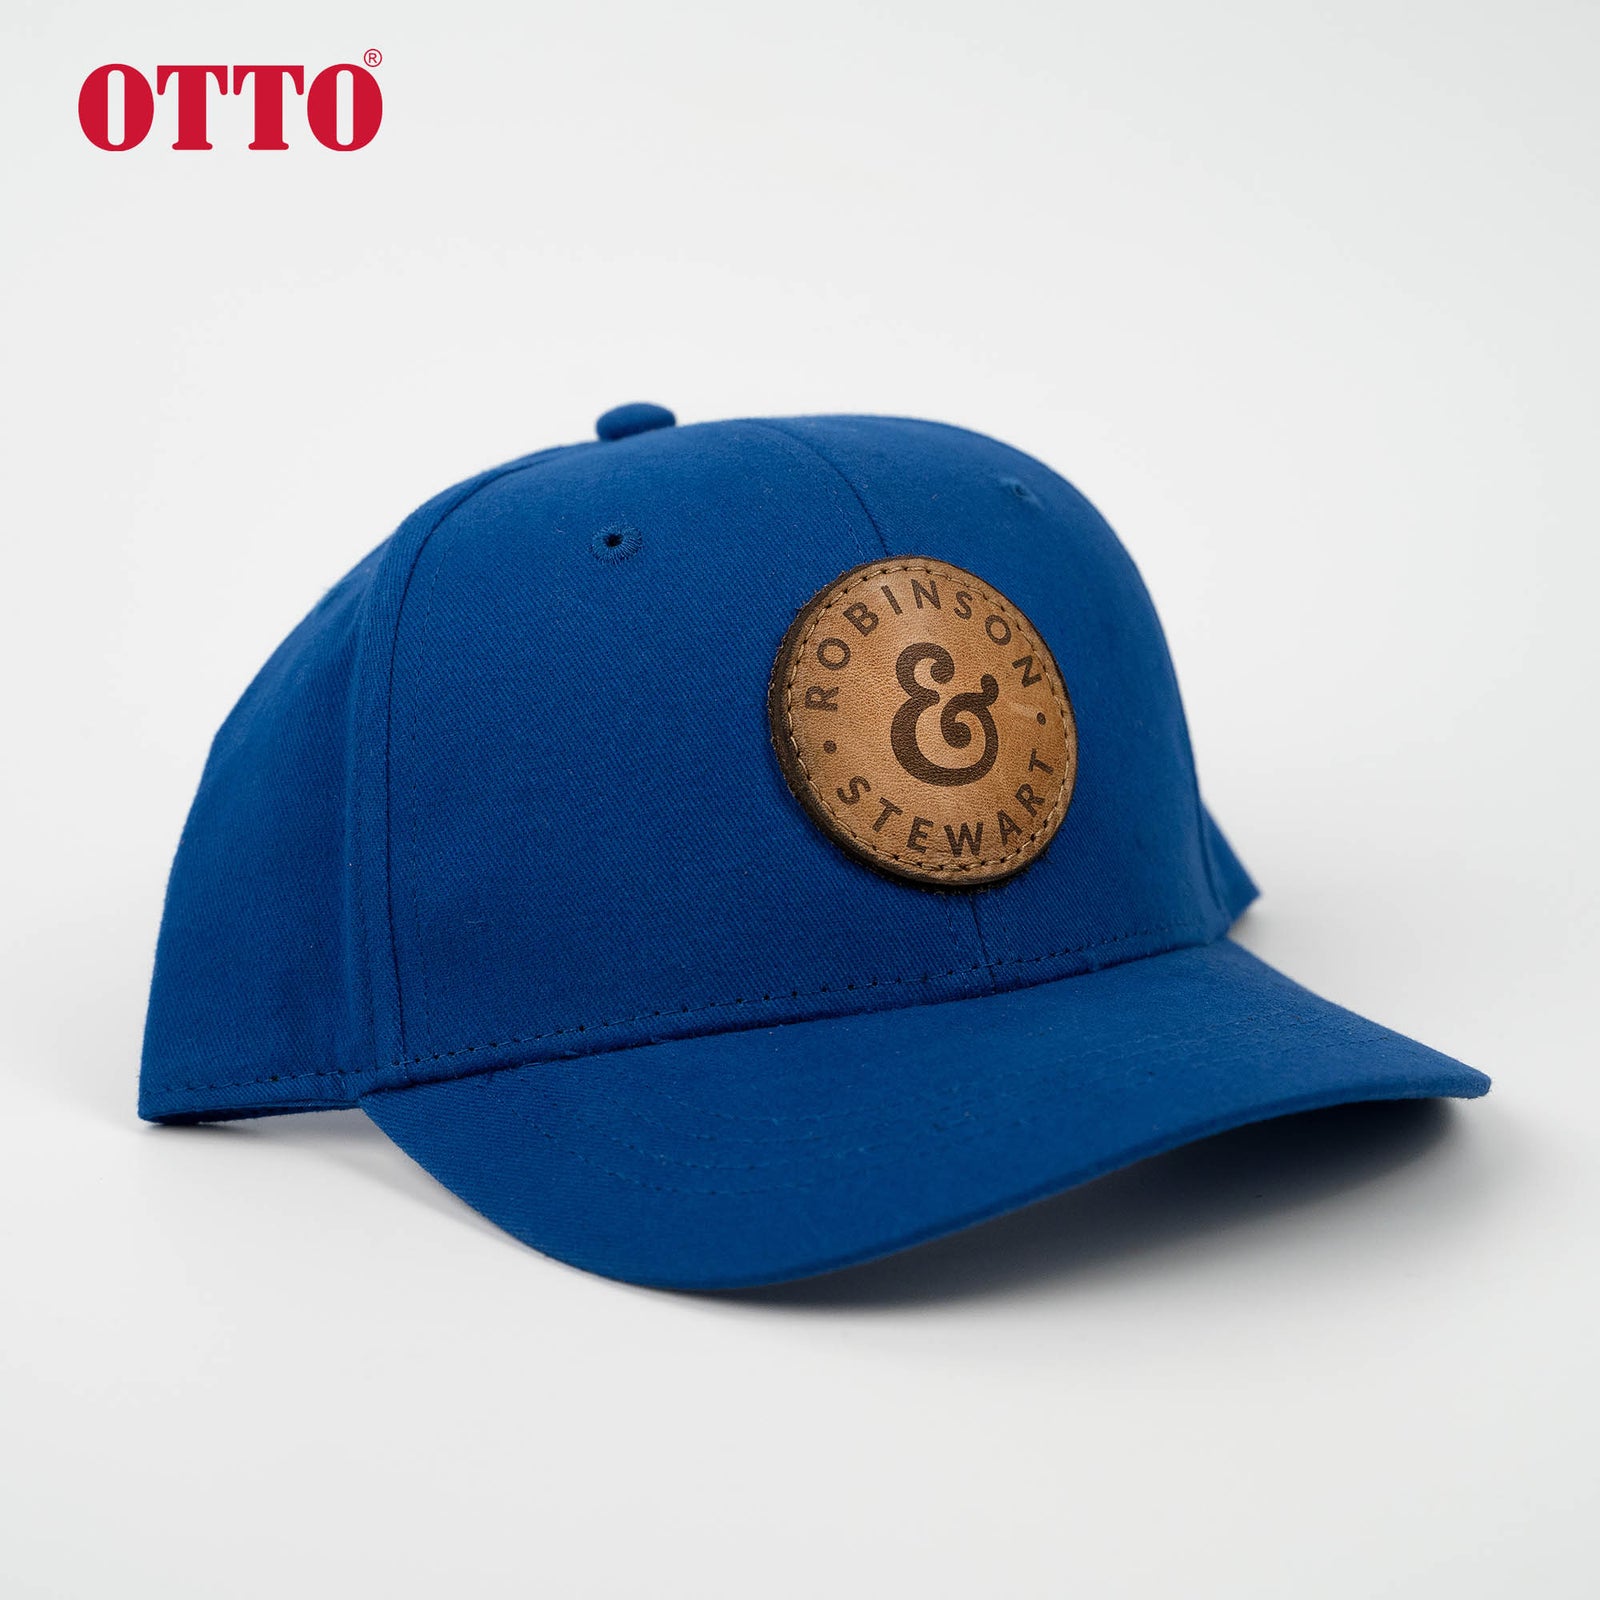 Lasered Leather Patch Kids Trucker Hat - OTTO 19-503 Youth 6 Panel 